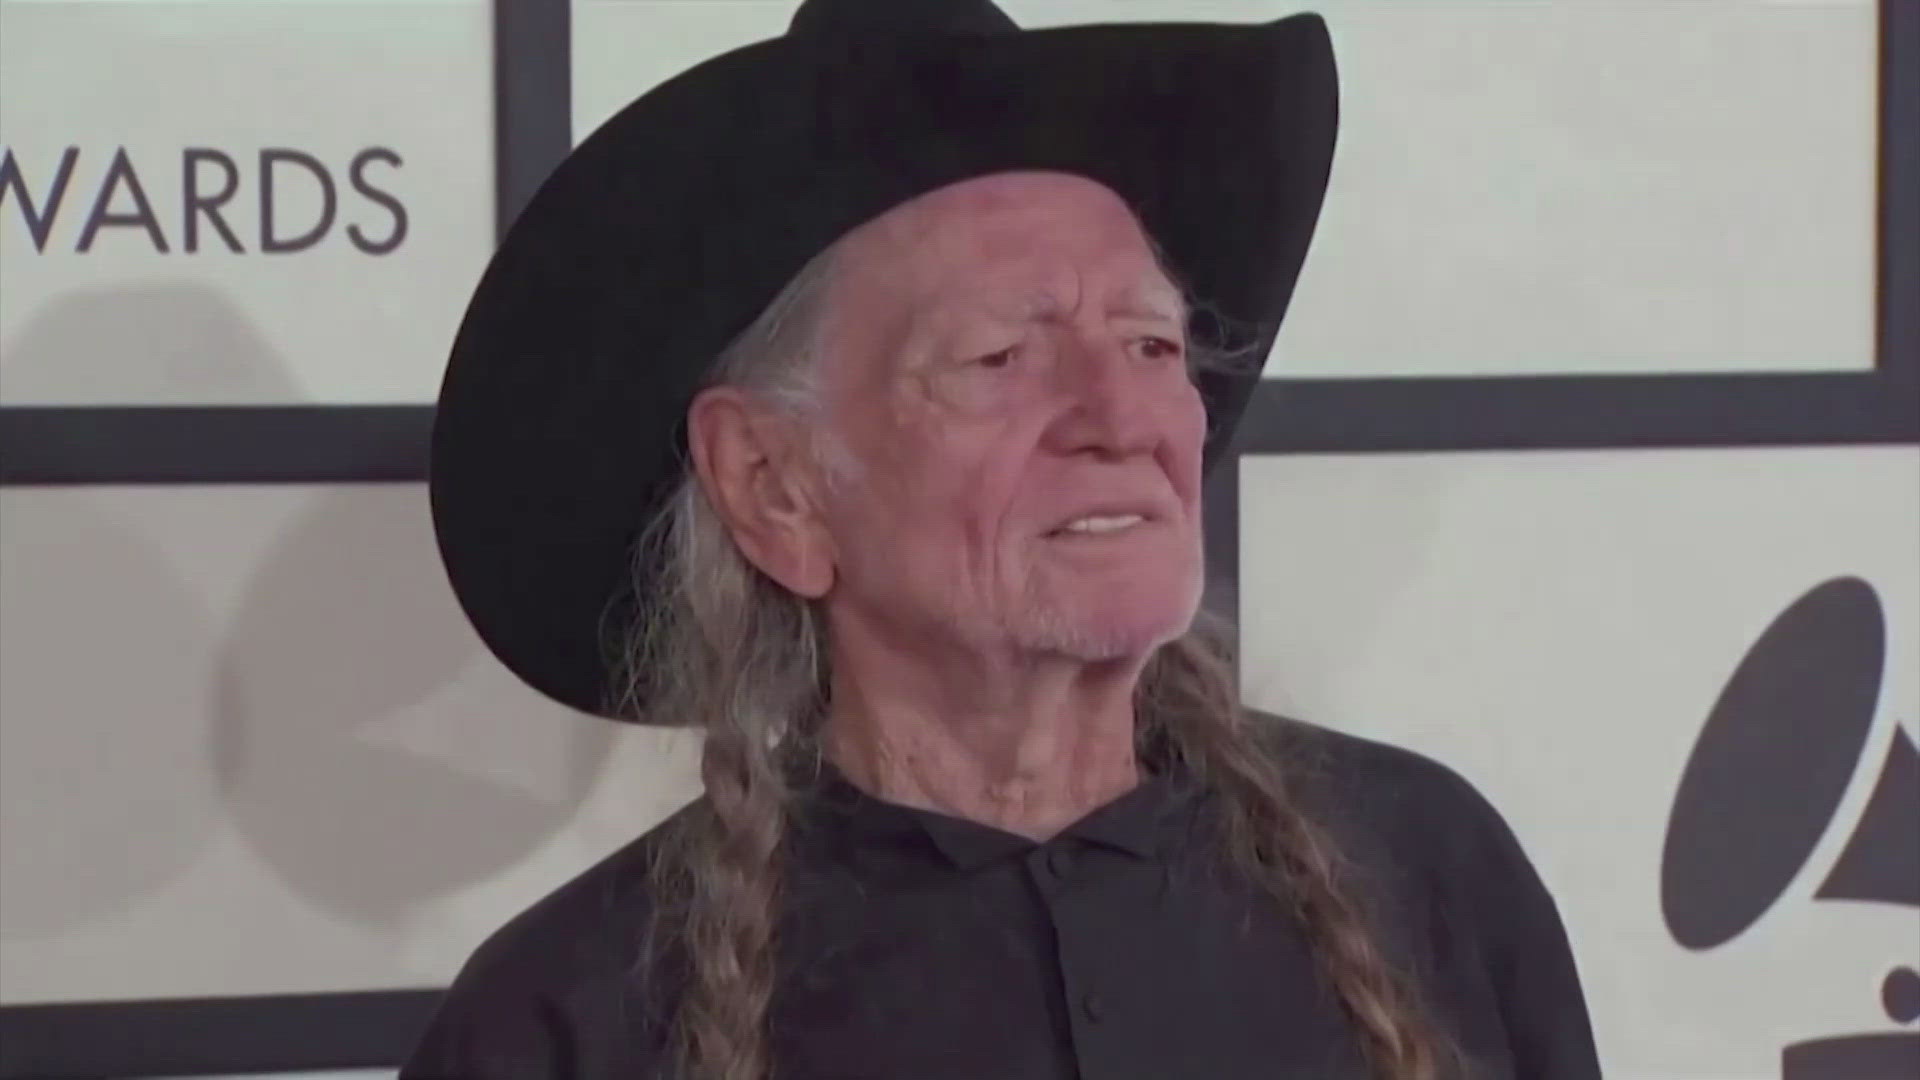 The 91-year-old entertainer is getting some rest while the Outlaw Music Festival carries on.